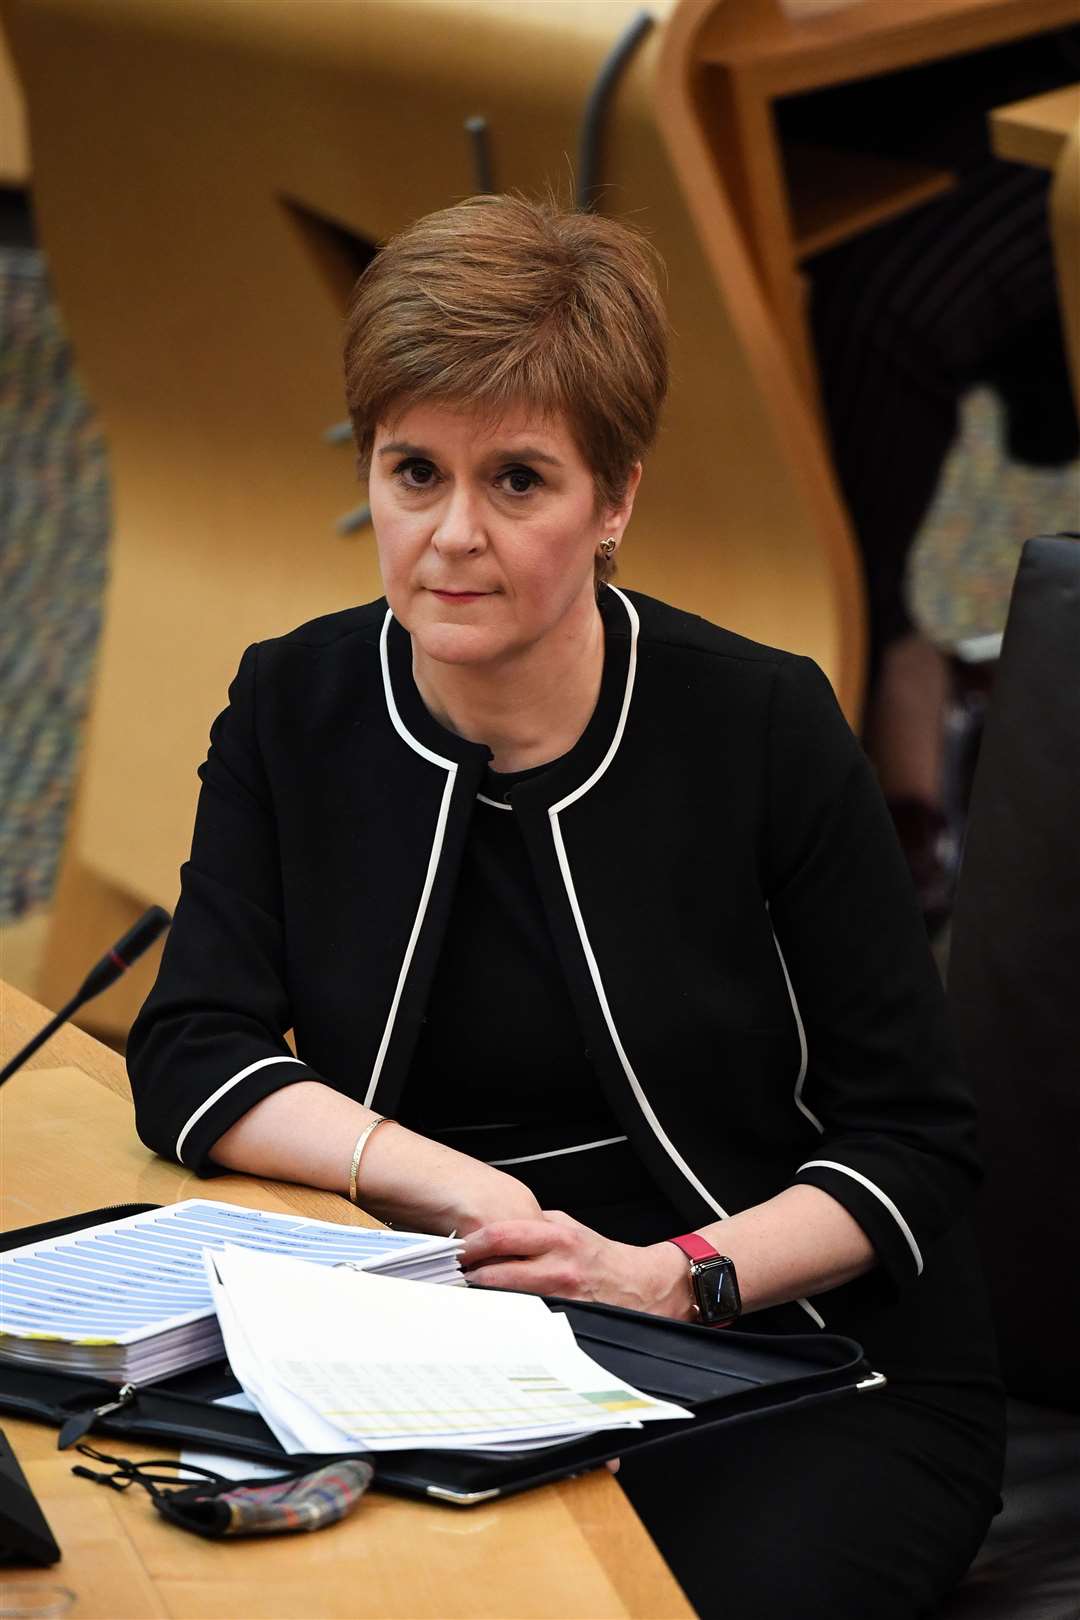 Ms Sturgeon gave her account in a letter to MSPs examining the Scotland Government’s handling of complaints against Mr Salmond (PA)